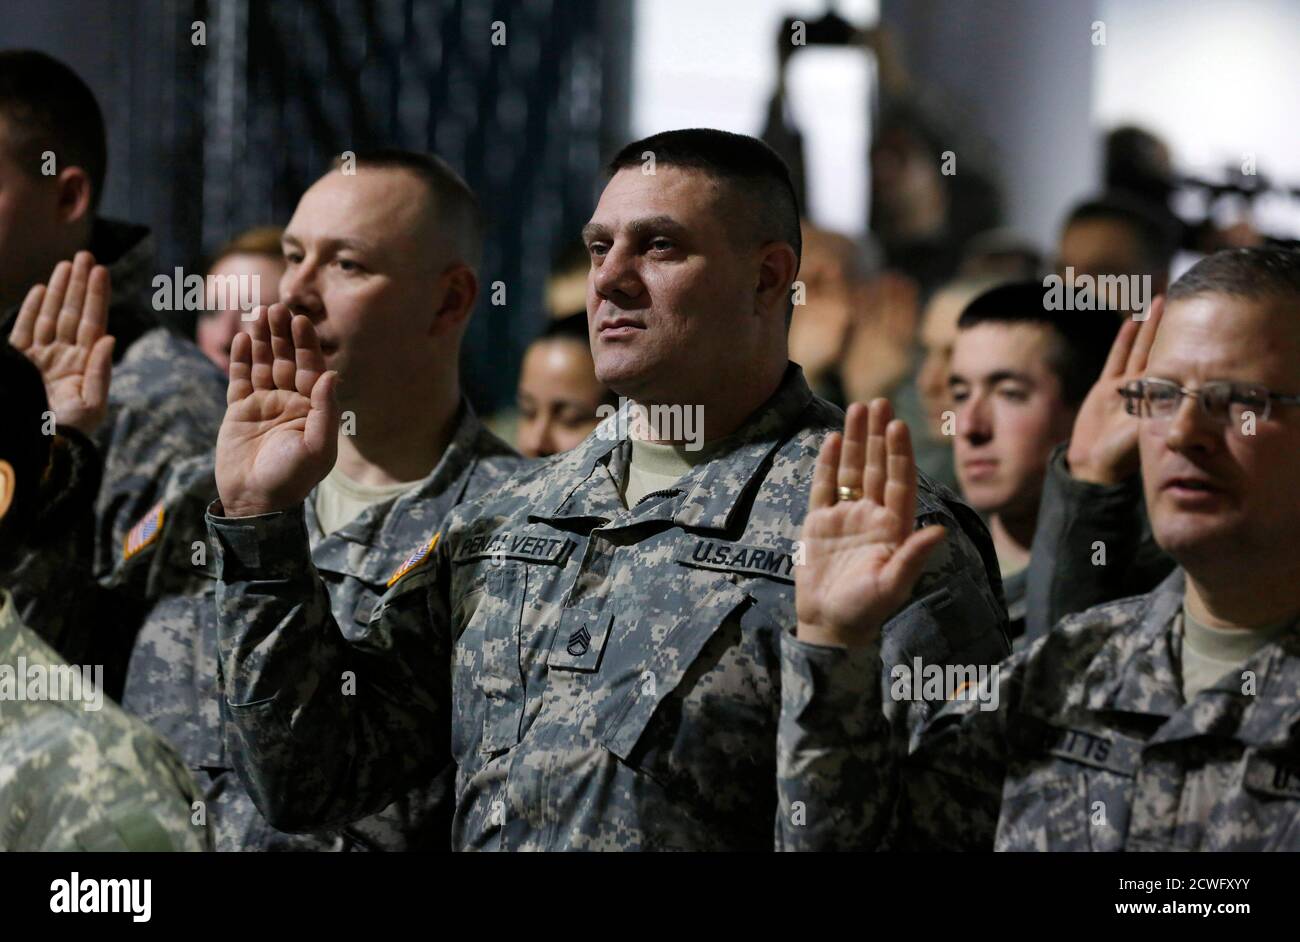 Members of the Pennsylvania National Guard raise their right hand as they are sworn in and receive law enforcement powers for the 57th Presidential Inauguration from a representative of Washington's Metropolitian Police at the DC Armory in Washington, January 18, 2013.   REUTERS/Larry Downing  (UNITED STATES - Tags: POLITICS) Stock Photo